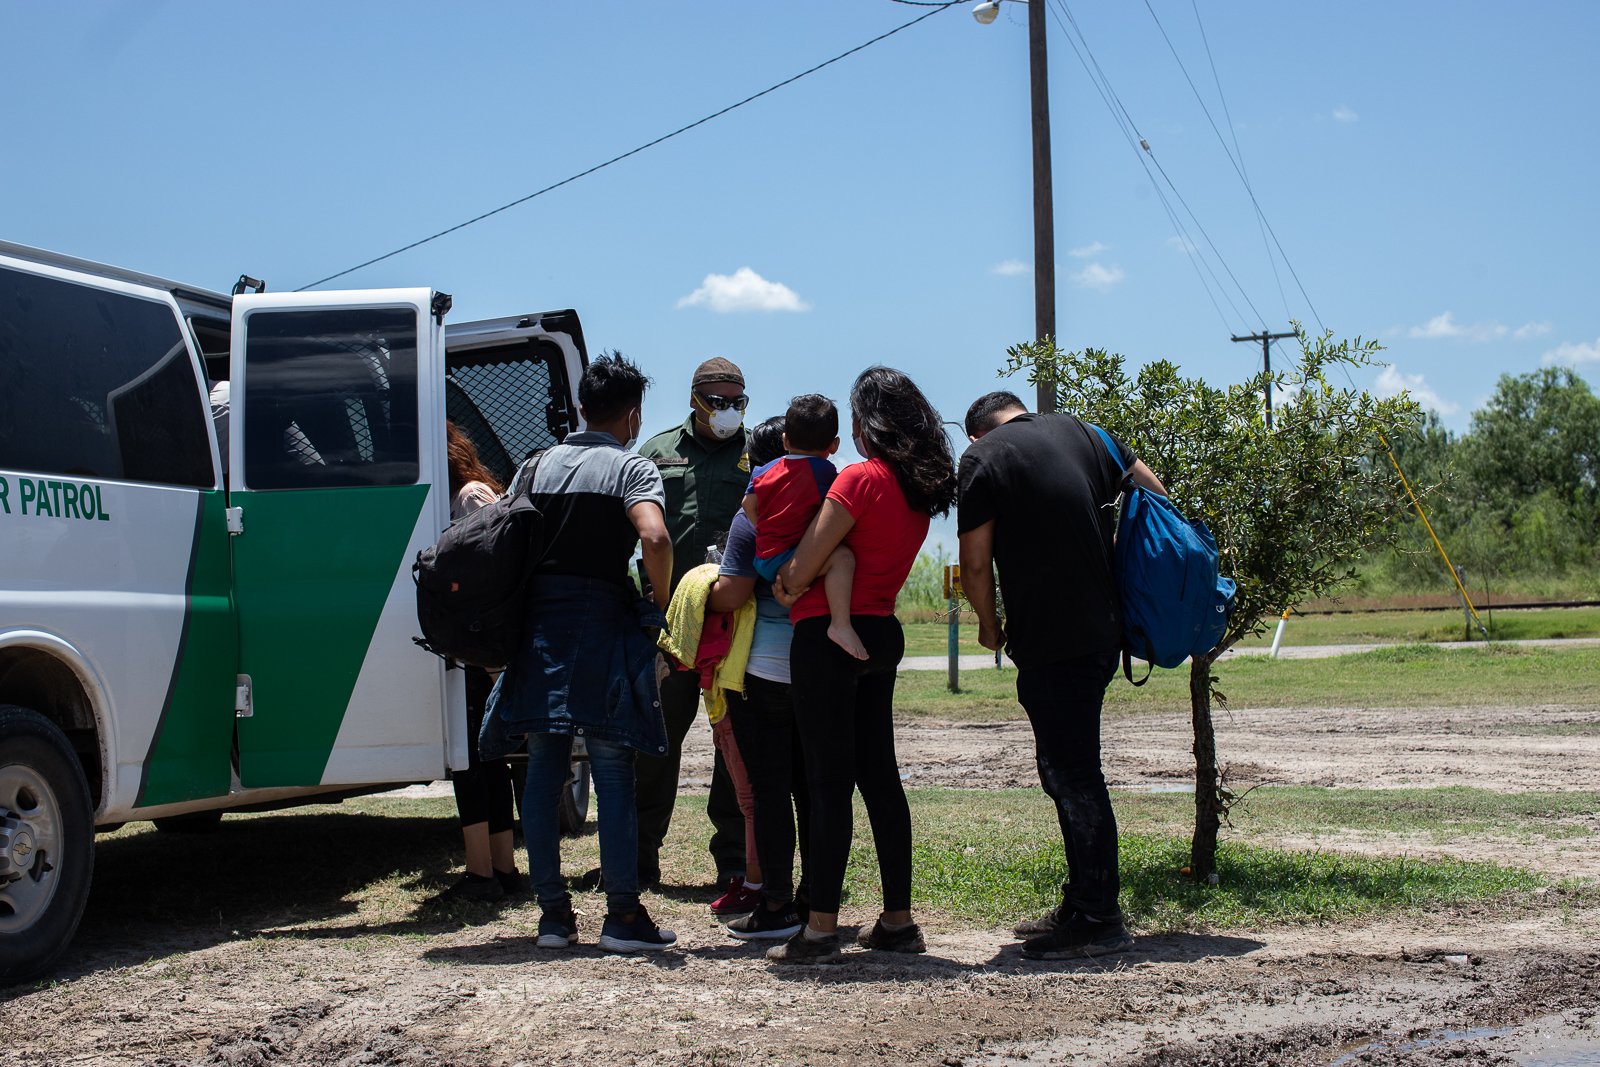 Migrants make their way to a Border Patrol transport vehicle after illegally entering the U.S. near ​La Joya, Texas, on August 7, 2021. (Kaylee Greenlee - Daily Caller News Foundation)